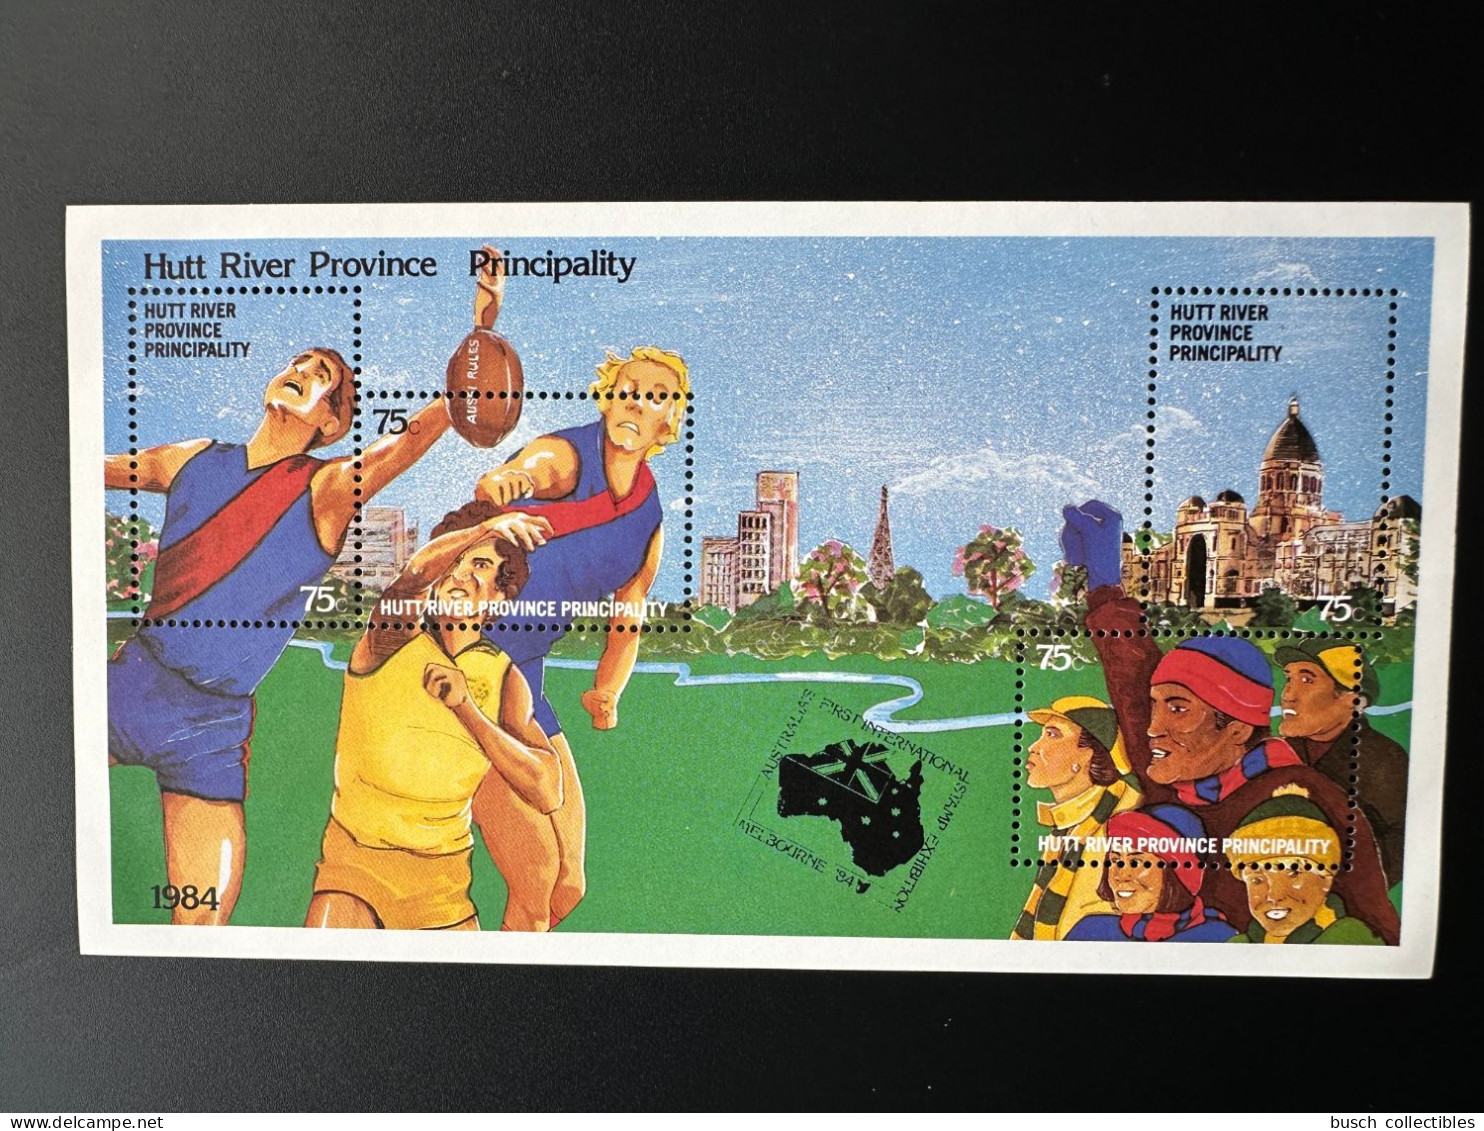 Australie Australia 1984 Hutt River Province Principality Rugby First International Stamp Exhibition Melbourne '84 - Blocs - Feuillets